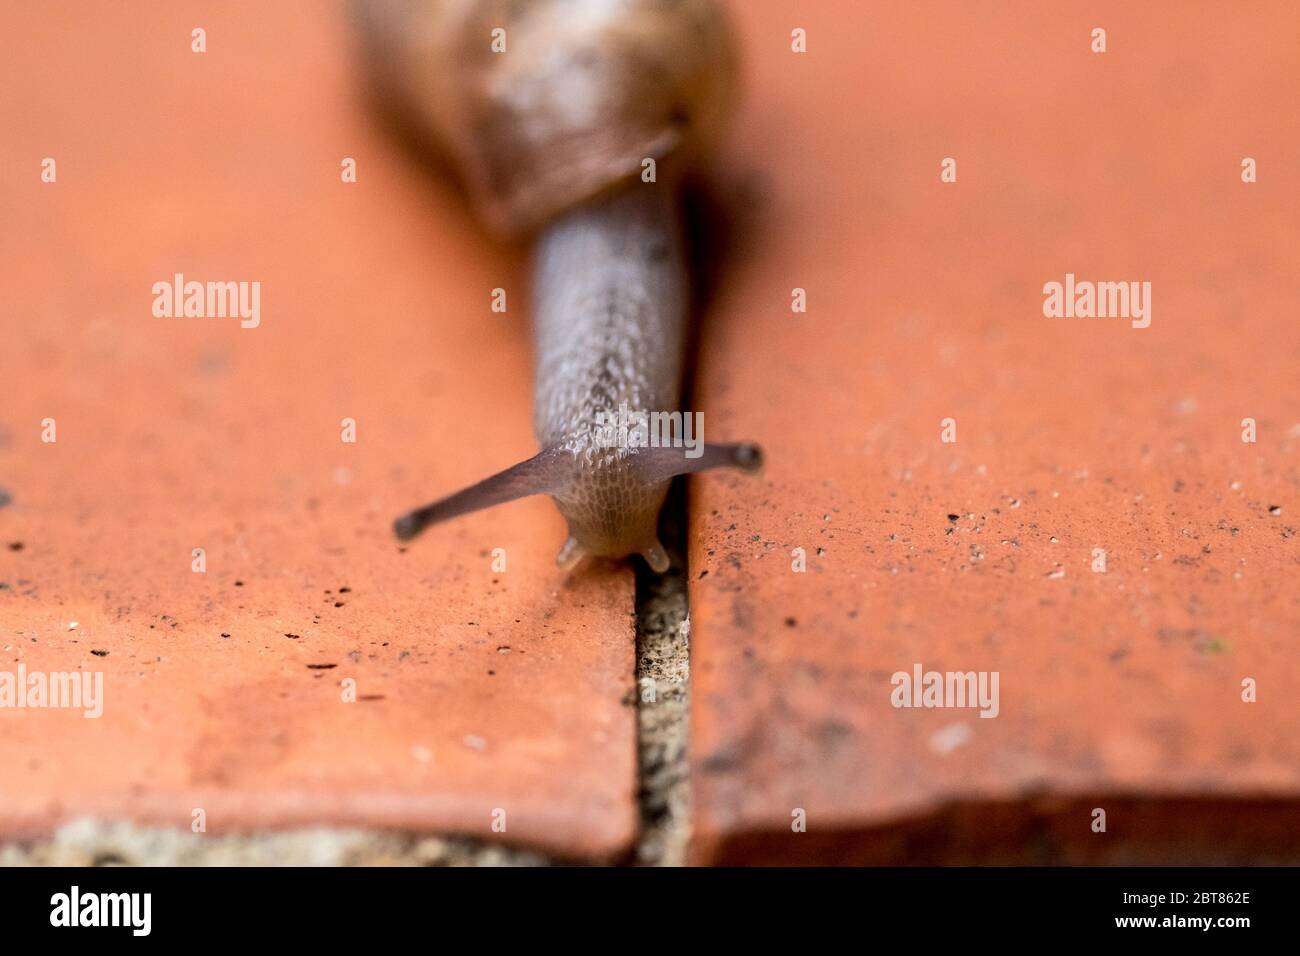 Rumina Decollata macro land snail carnivorous omnivore used for natural control of pests or species pulmonary gastropod mollusk family Subulinidae Stock Photo